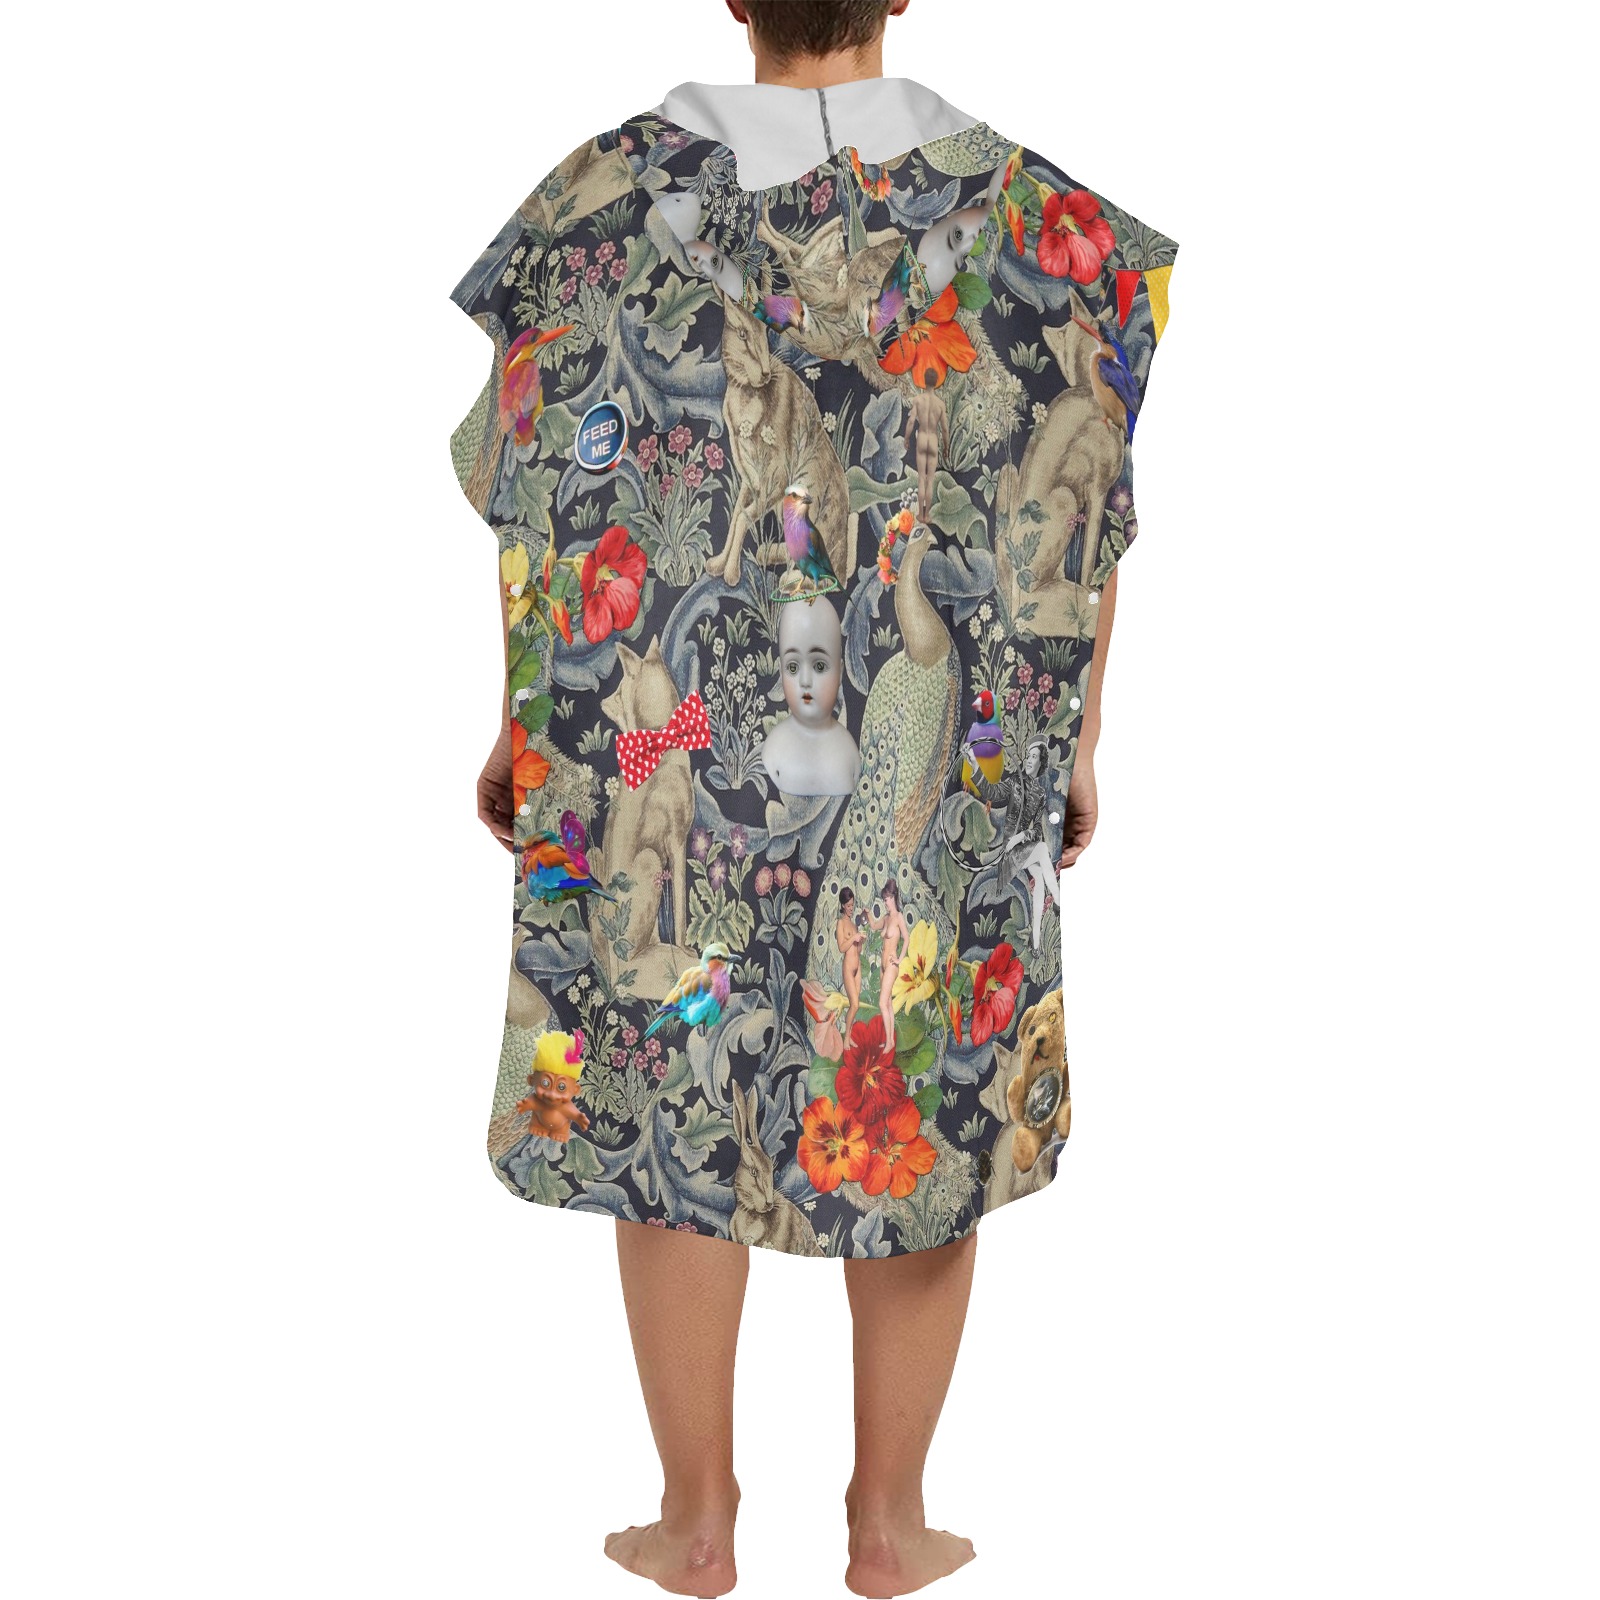 And Another Thing Beach Changing Robe (Large Size)